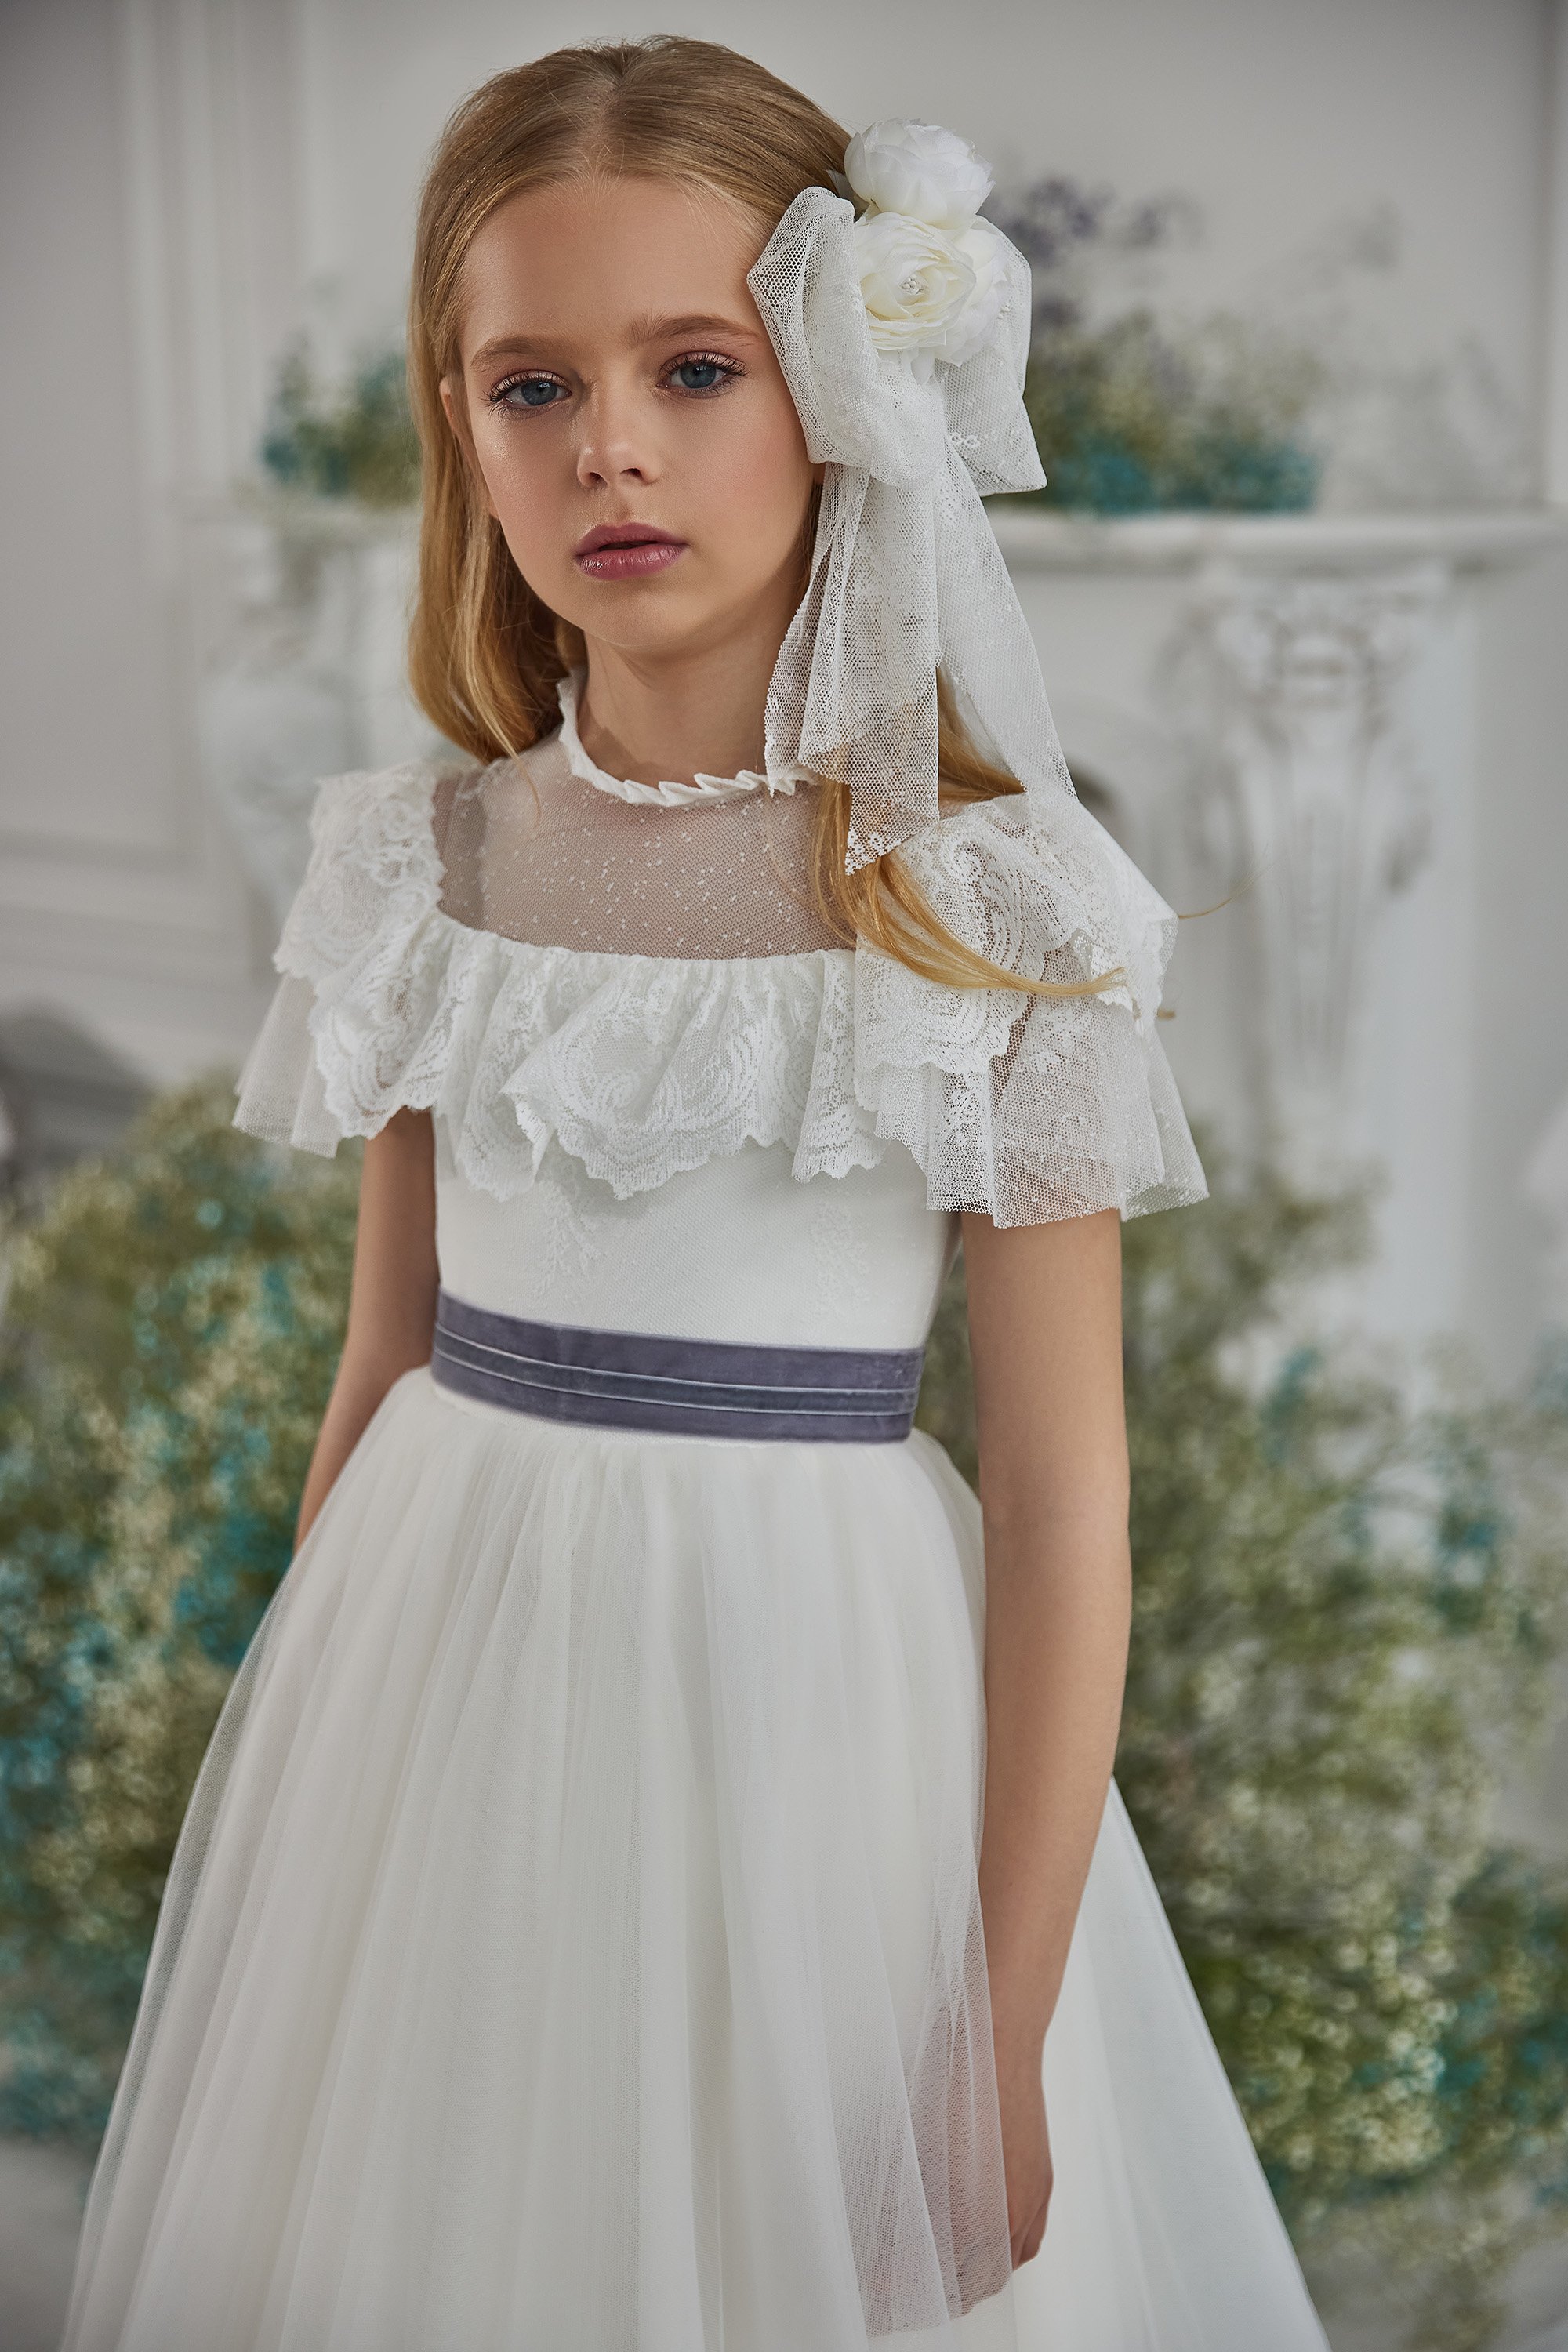 Children dress 3308 Product for Sale at NY City Bride